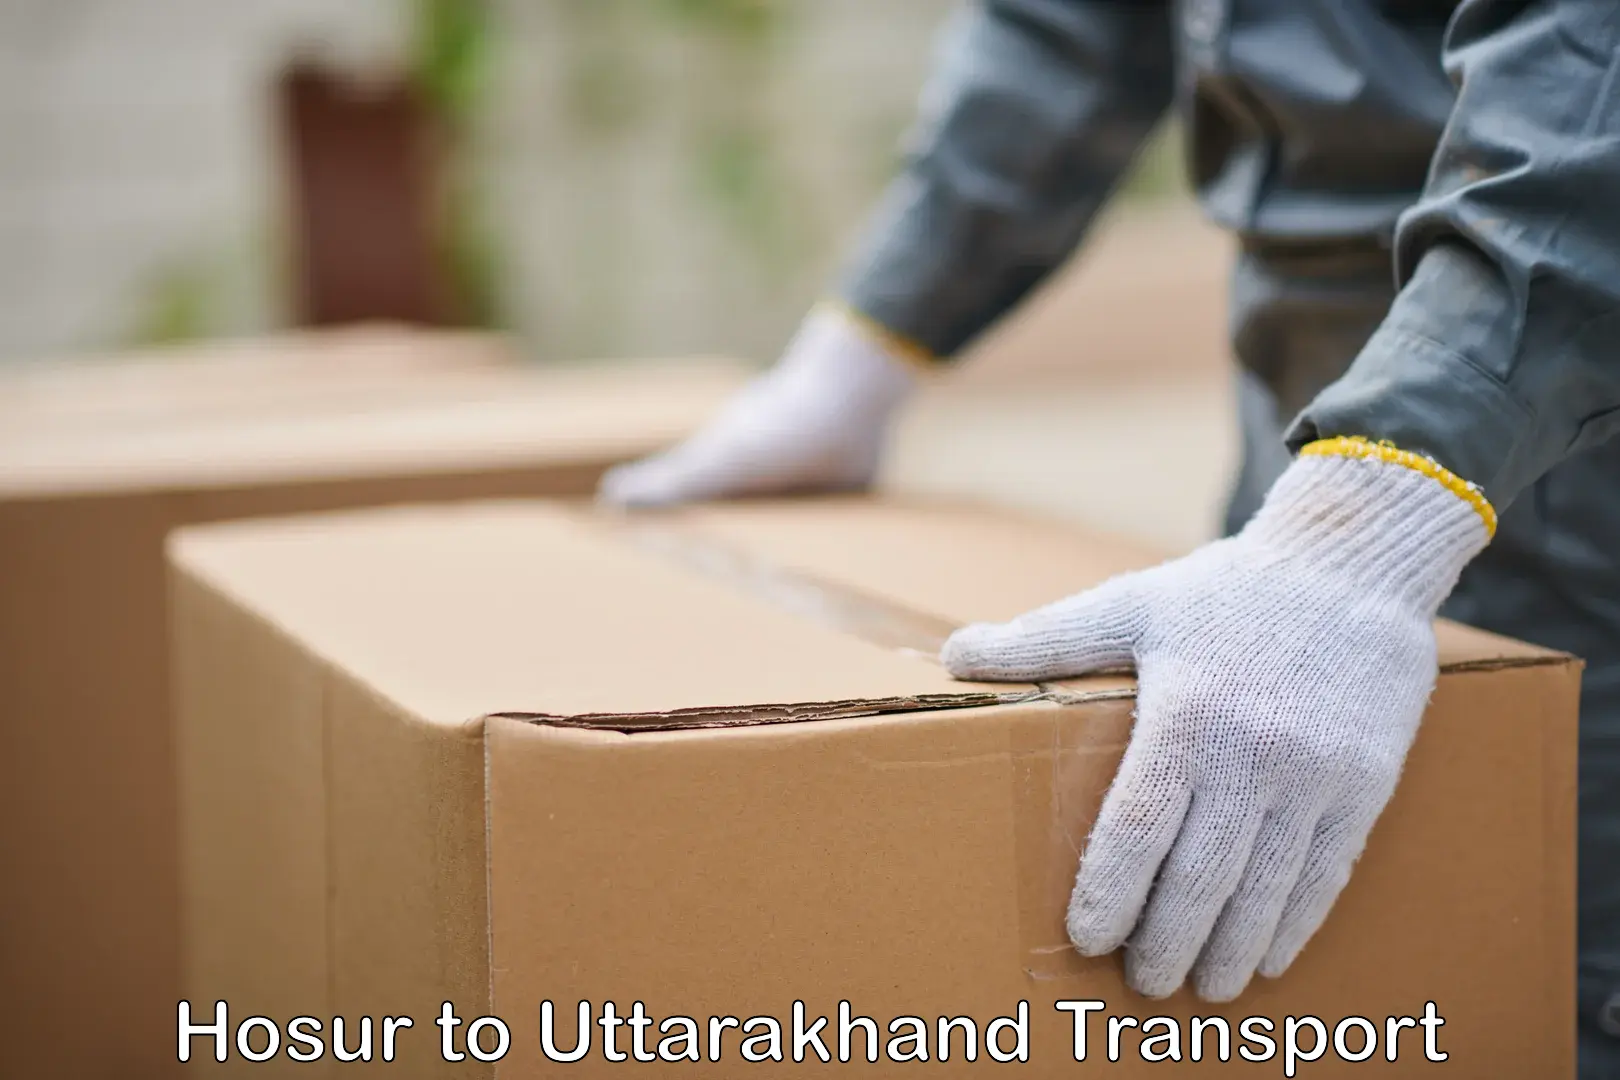 Truck transport companies in India Hosur to Doiwala